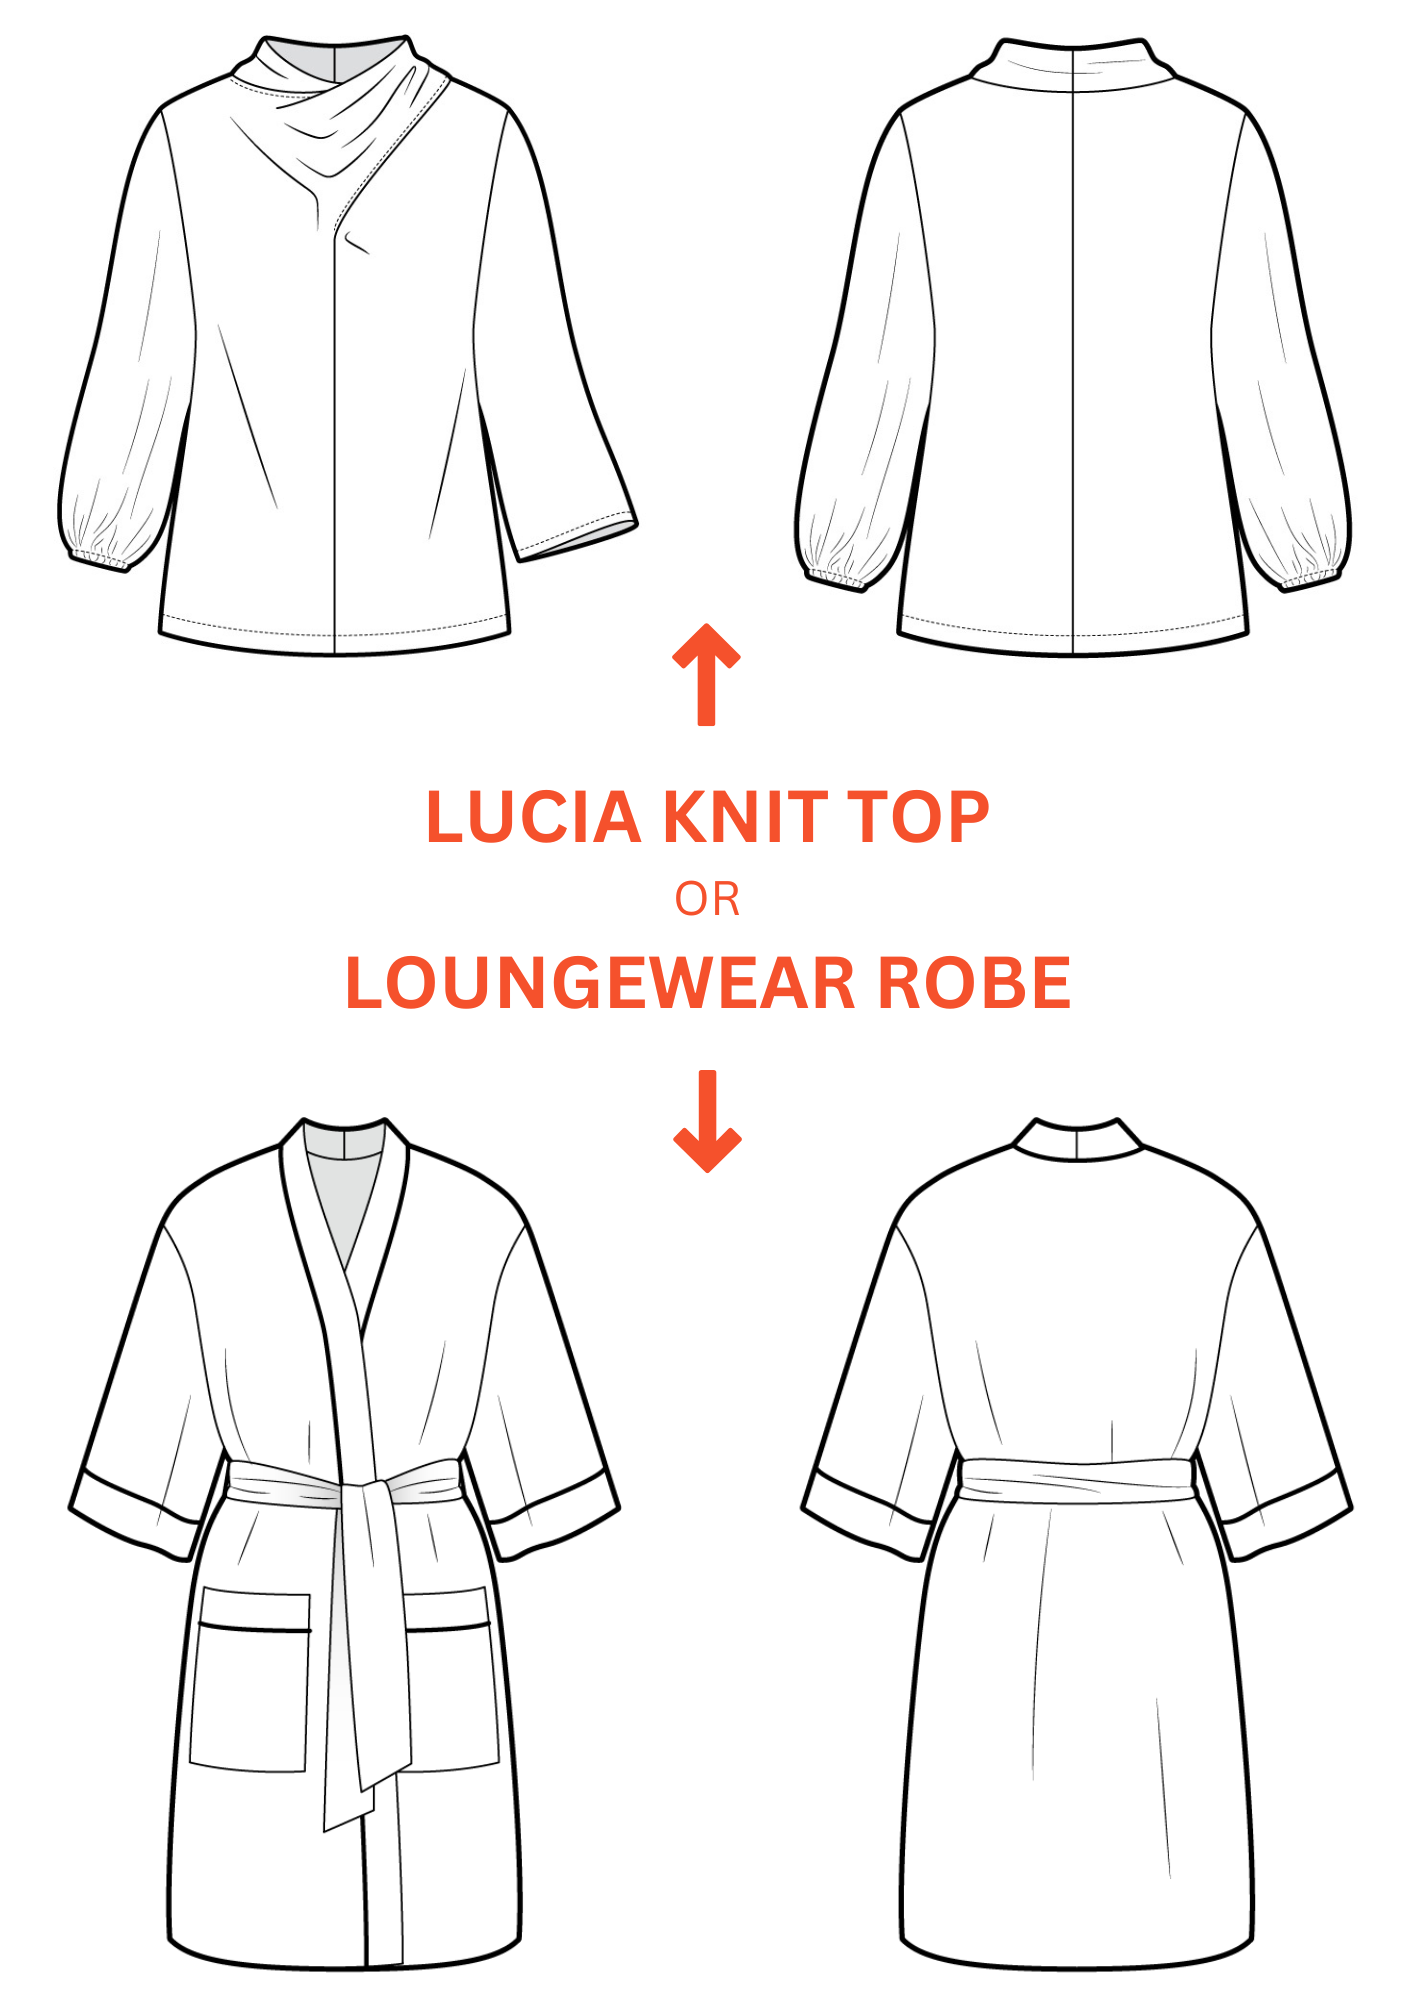 Lucia Knit Top or Loungewear Robe 